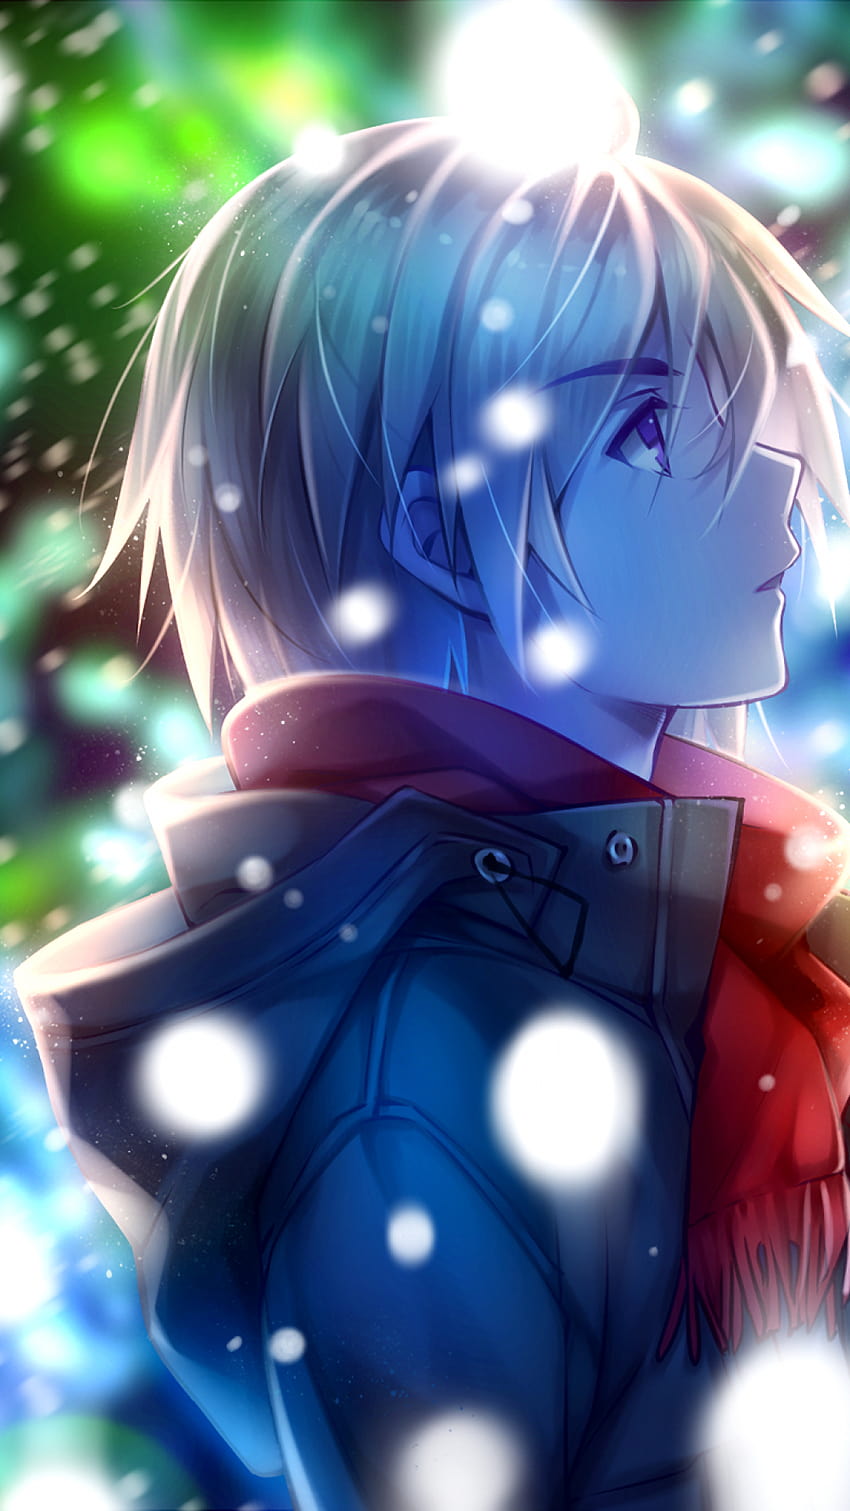 1080x1920 Anime Boy, Profile View, Red Scarf, Winter, Snow, Coffee for iPhone 8, iPhone 7 Plus, iPhone 6+, Sony Xperia Z, HTC One, winter boy anime HD phone wallpaper